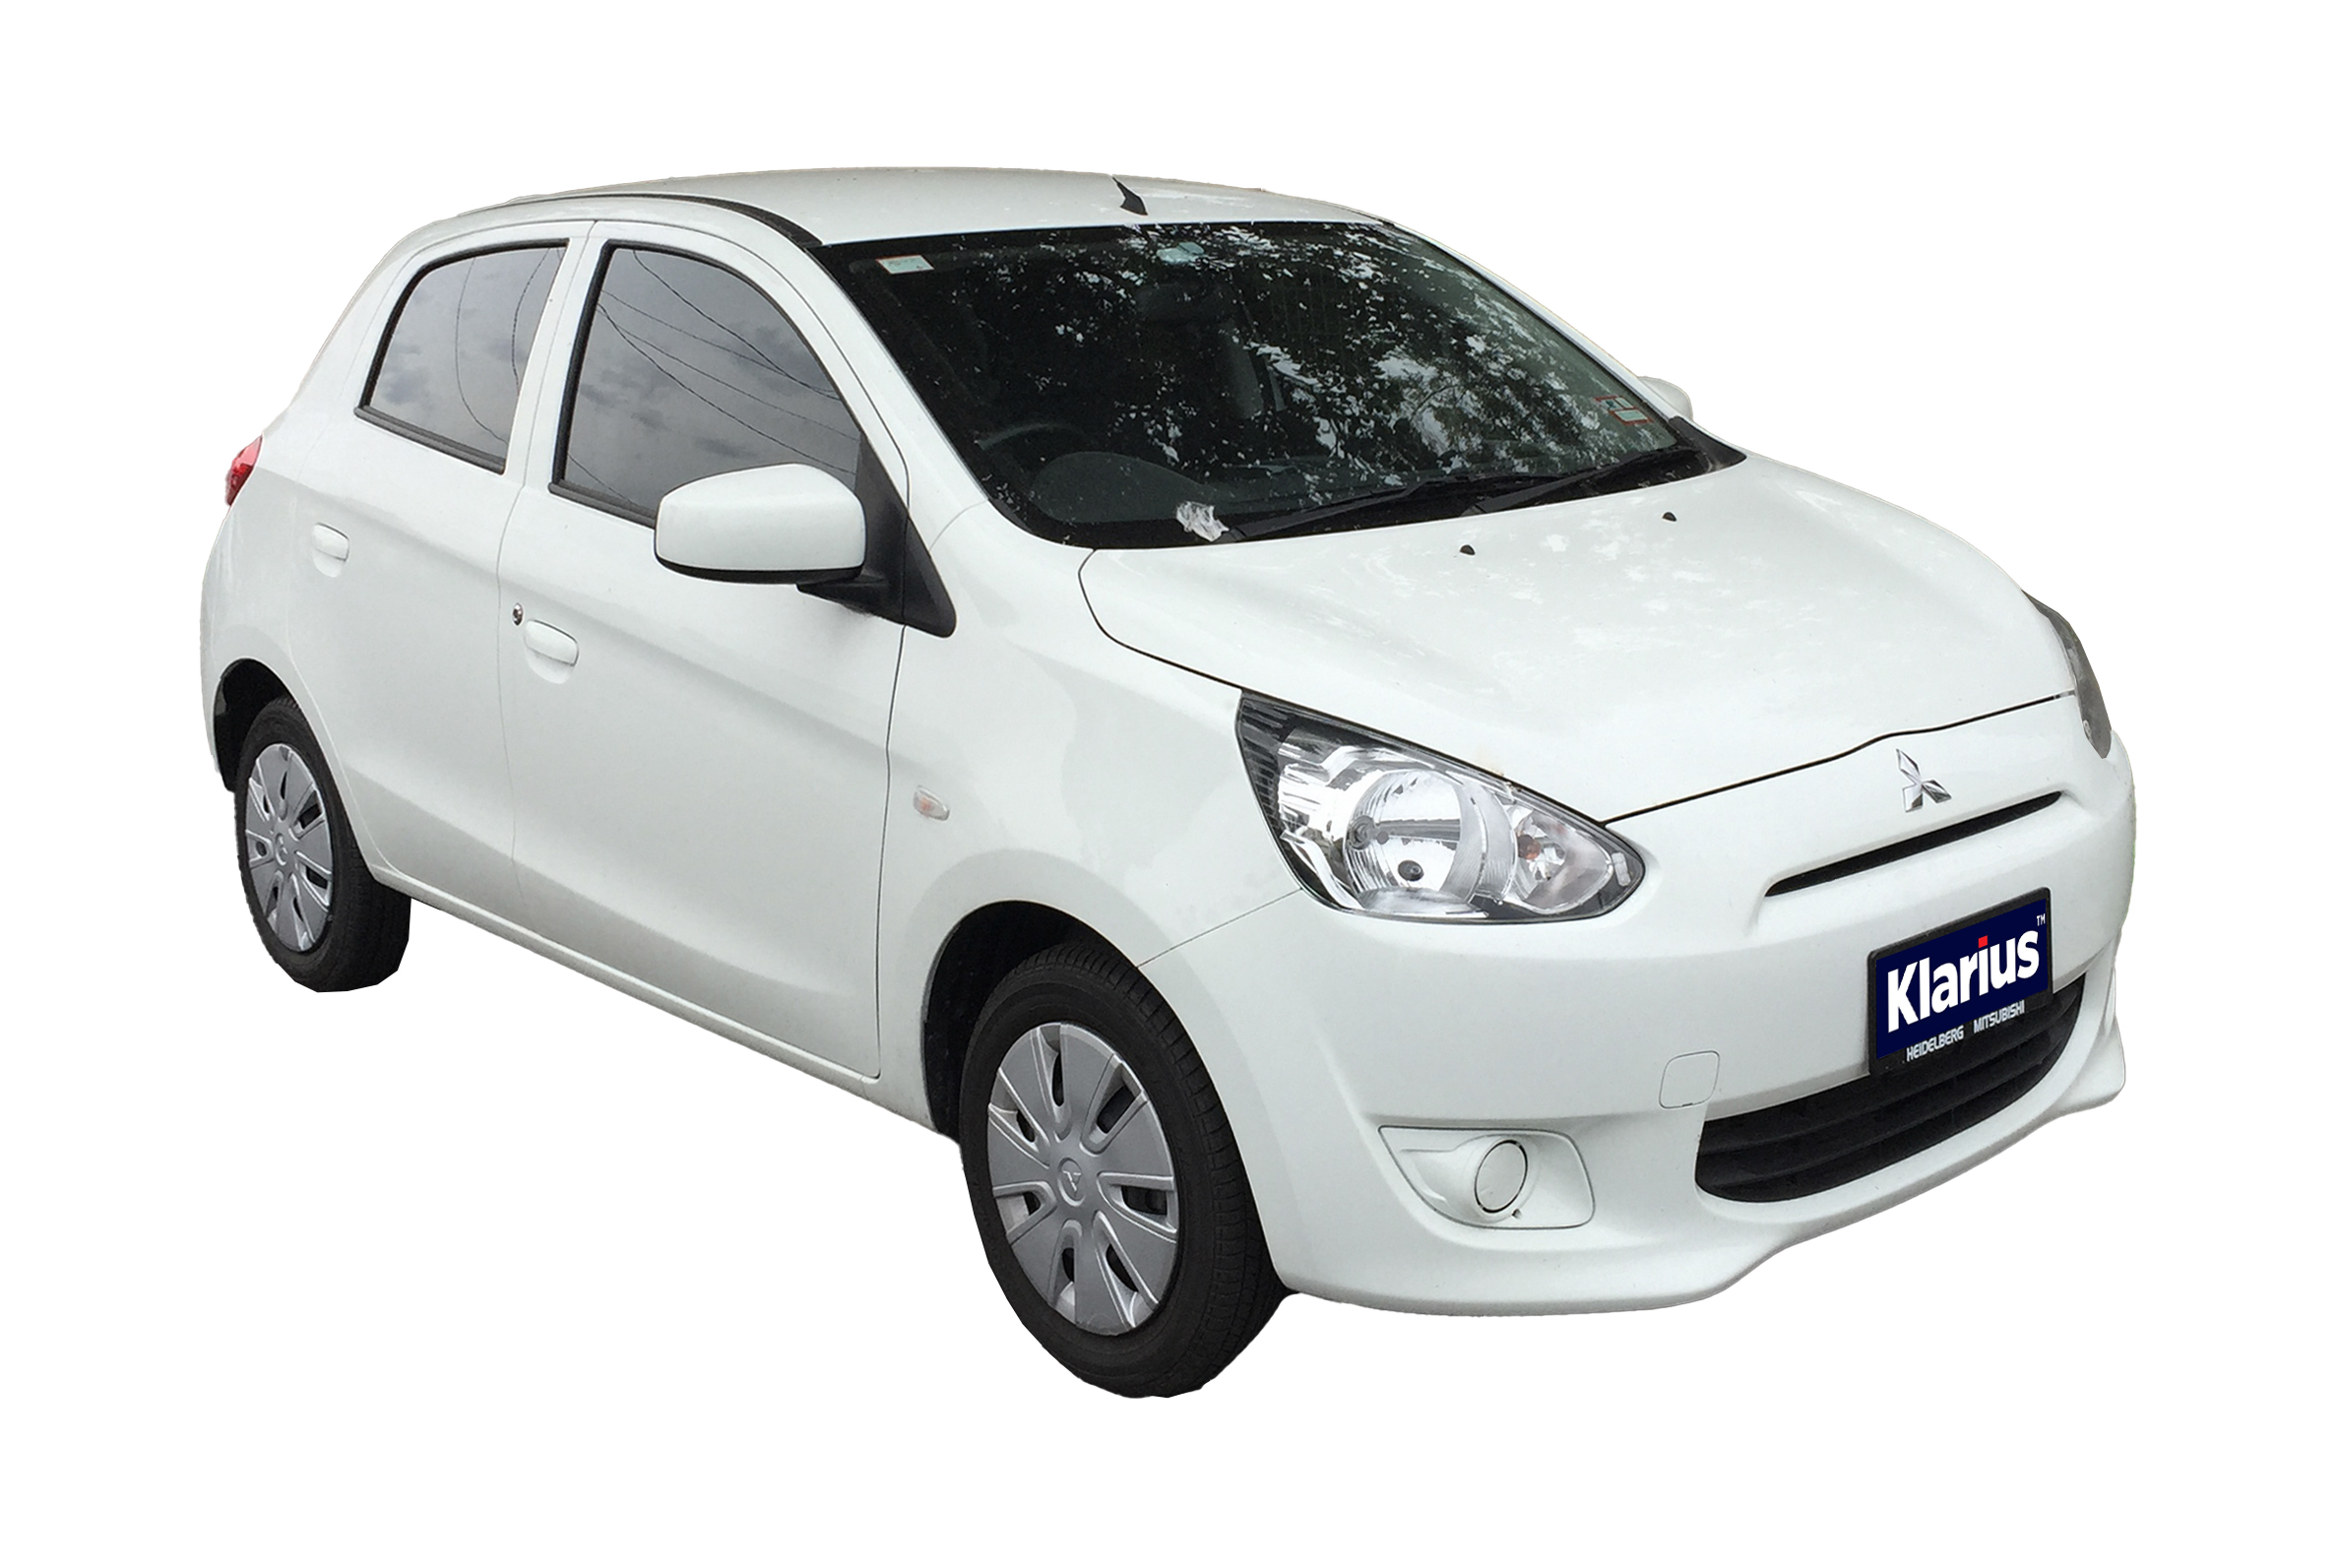 Klarius releases a new range of car parts, offering more support for the Mitsubishi Mirage